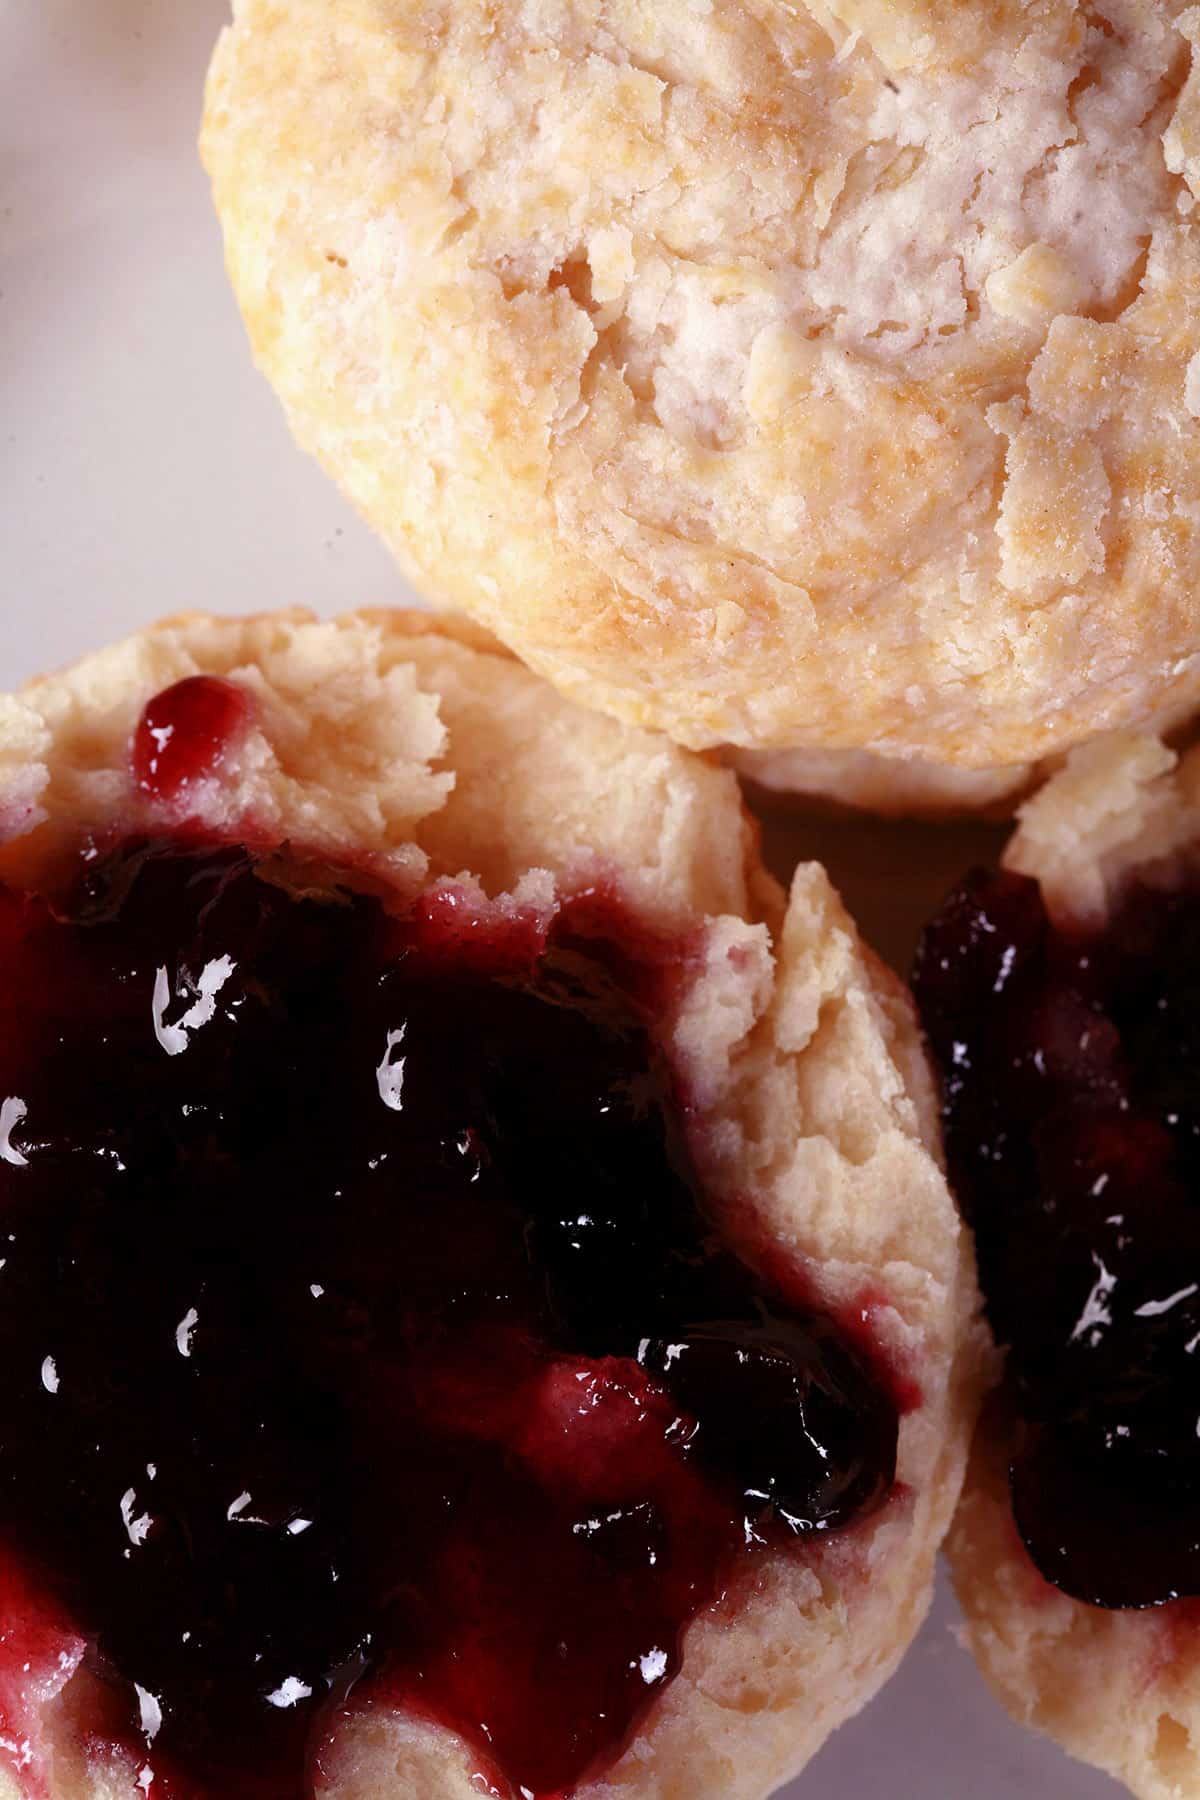 An easy baking powder biscuit split in half and spread with grape jelly.